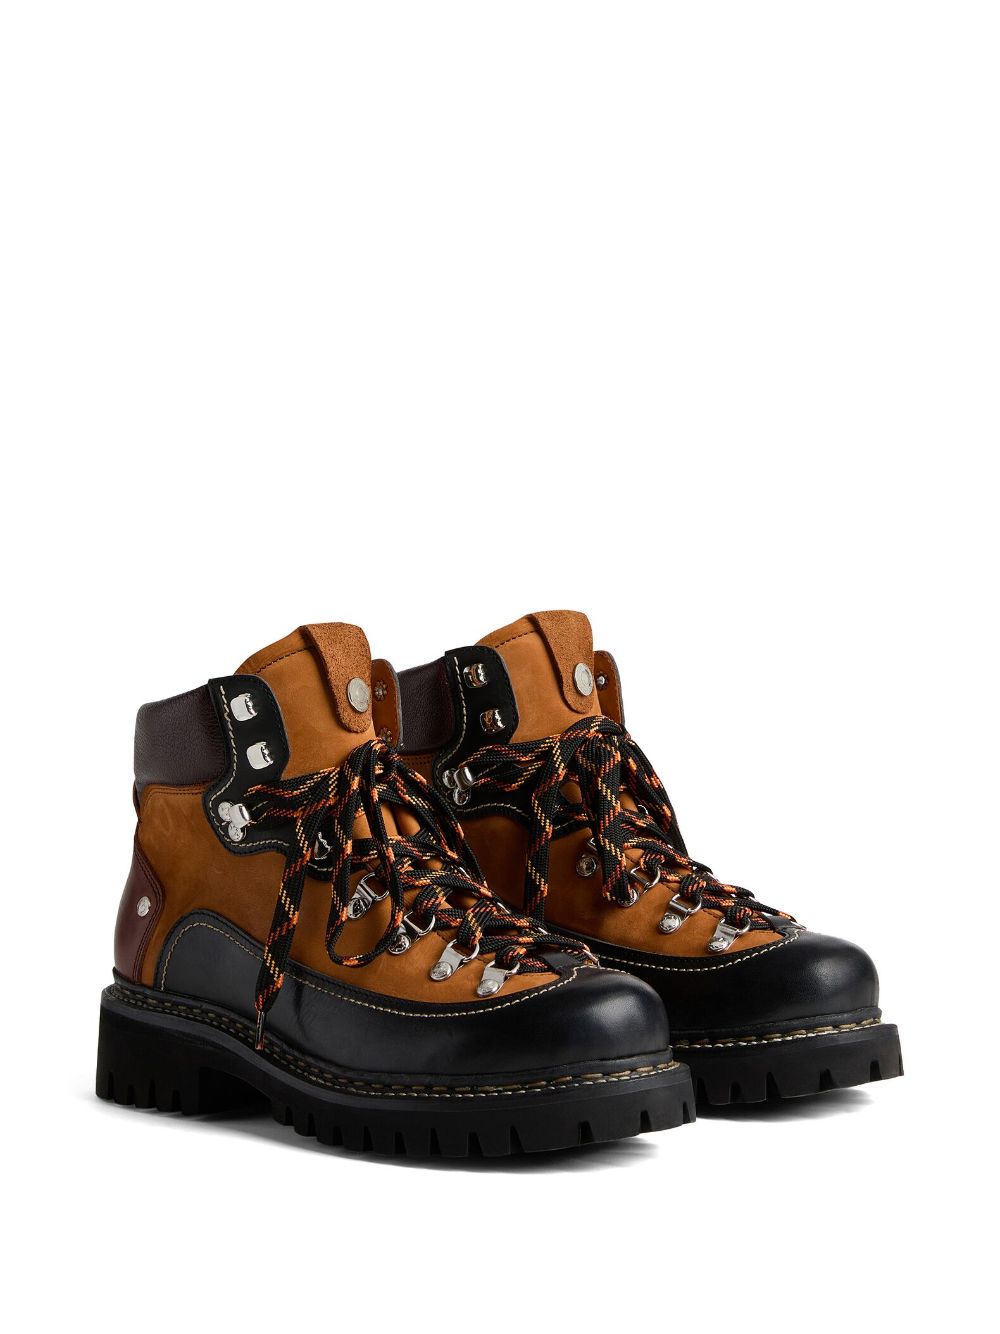 DSQUARED2 Men's Panelled Leather Hiking Boots - FW23